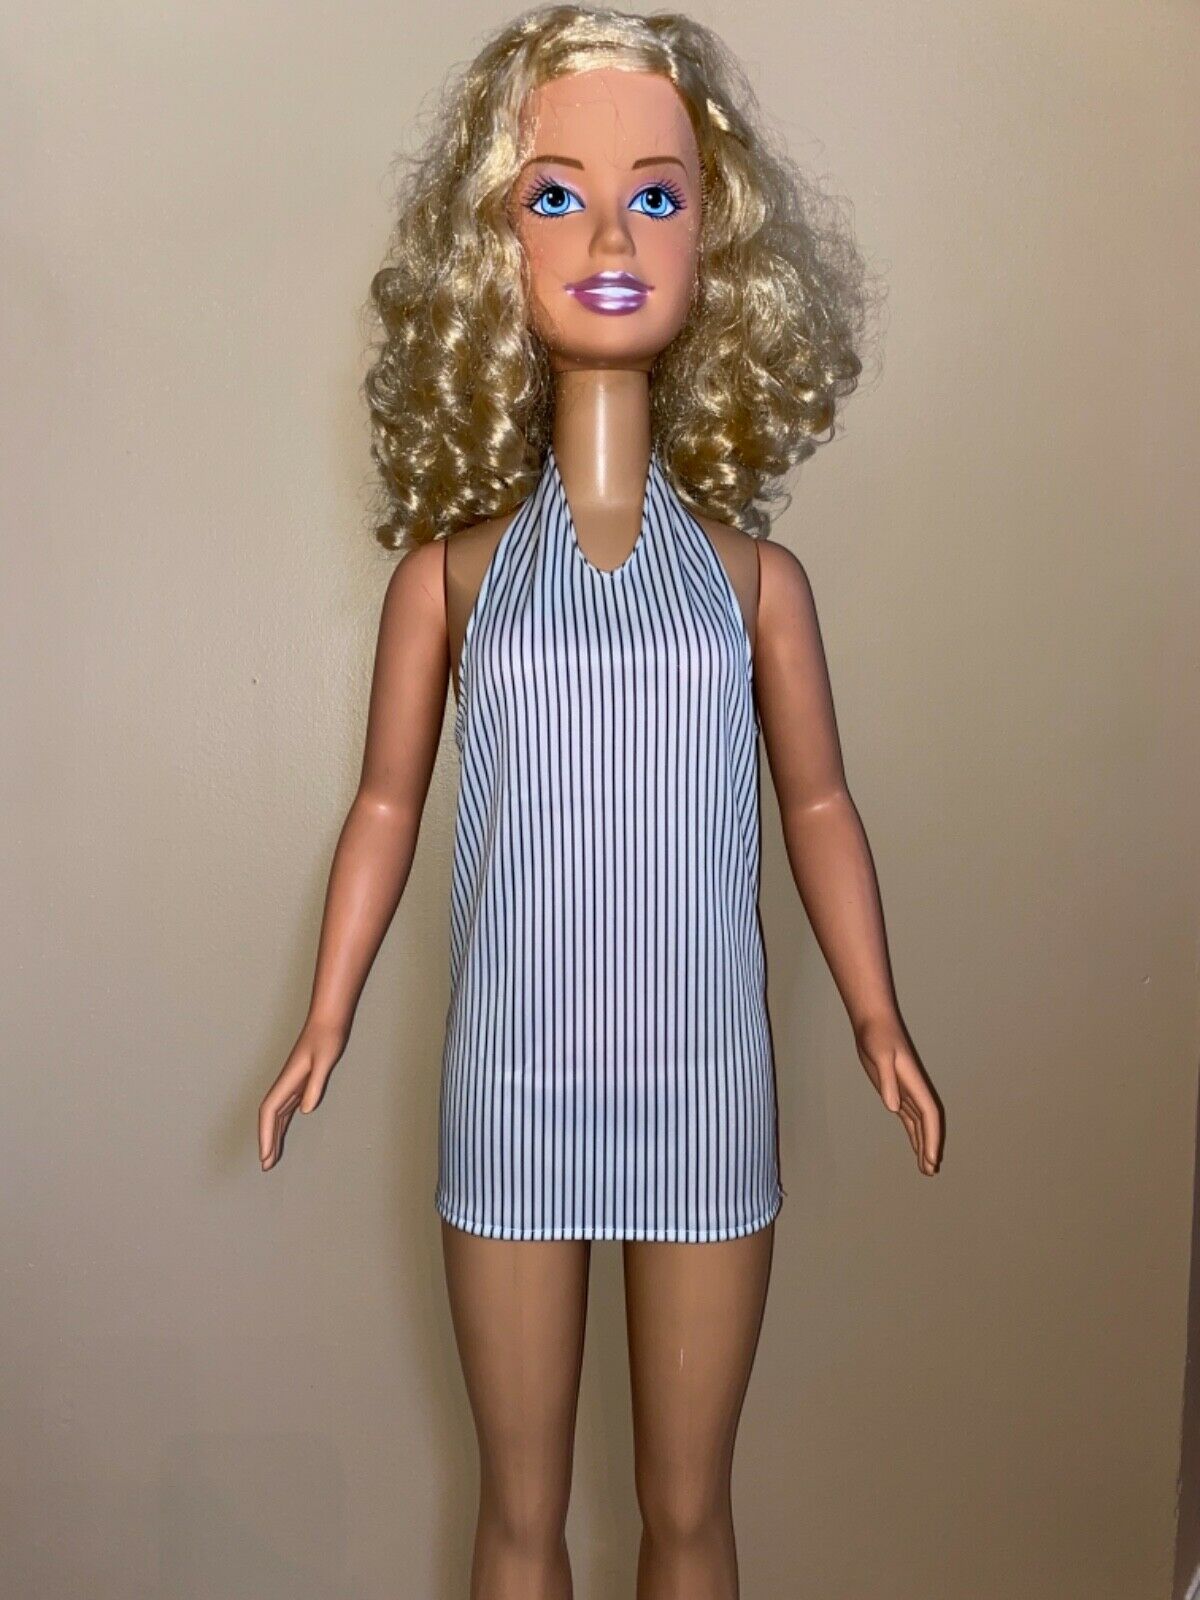 My Size Barbie Clothes -36 Inch- Short Halter Style Party Dress